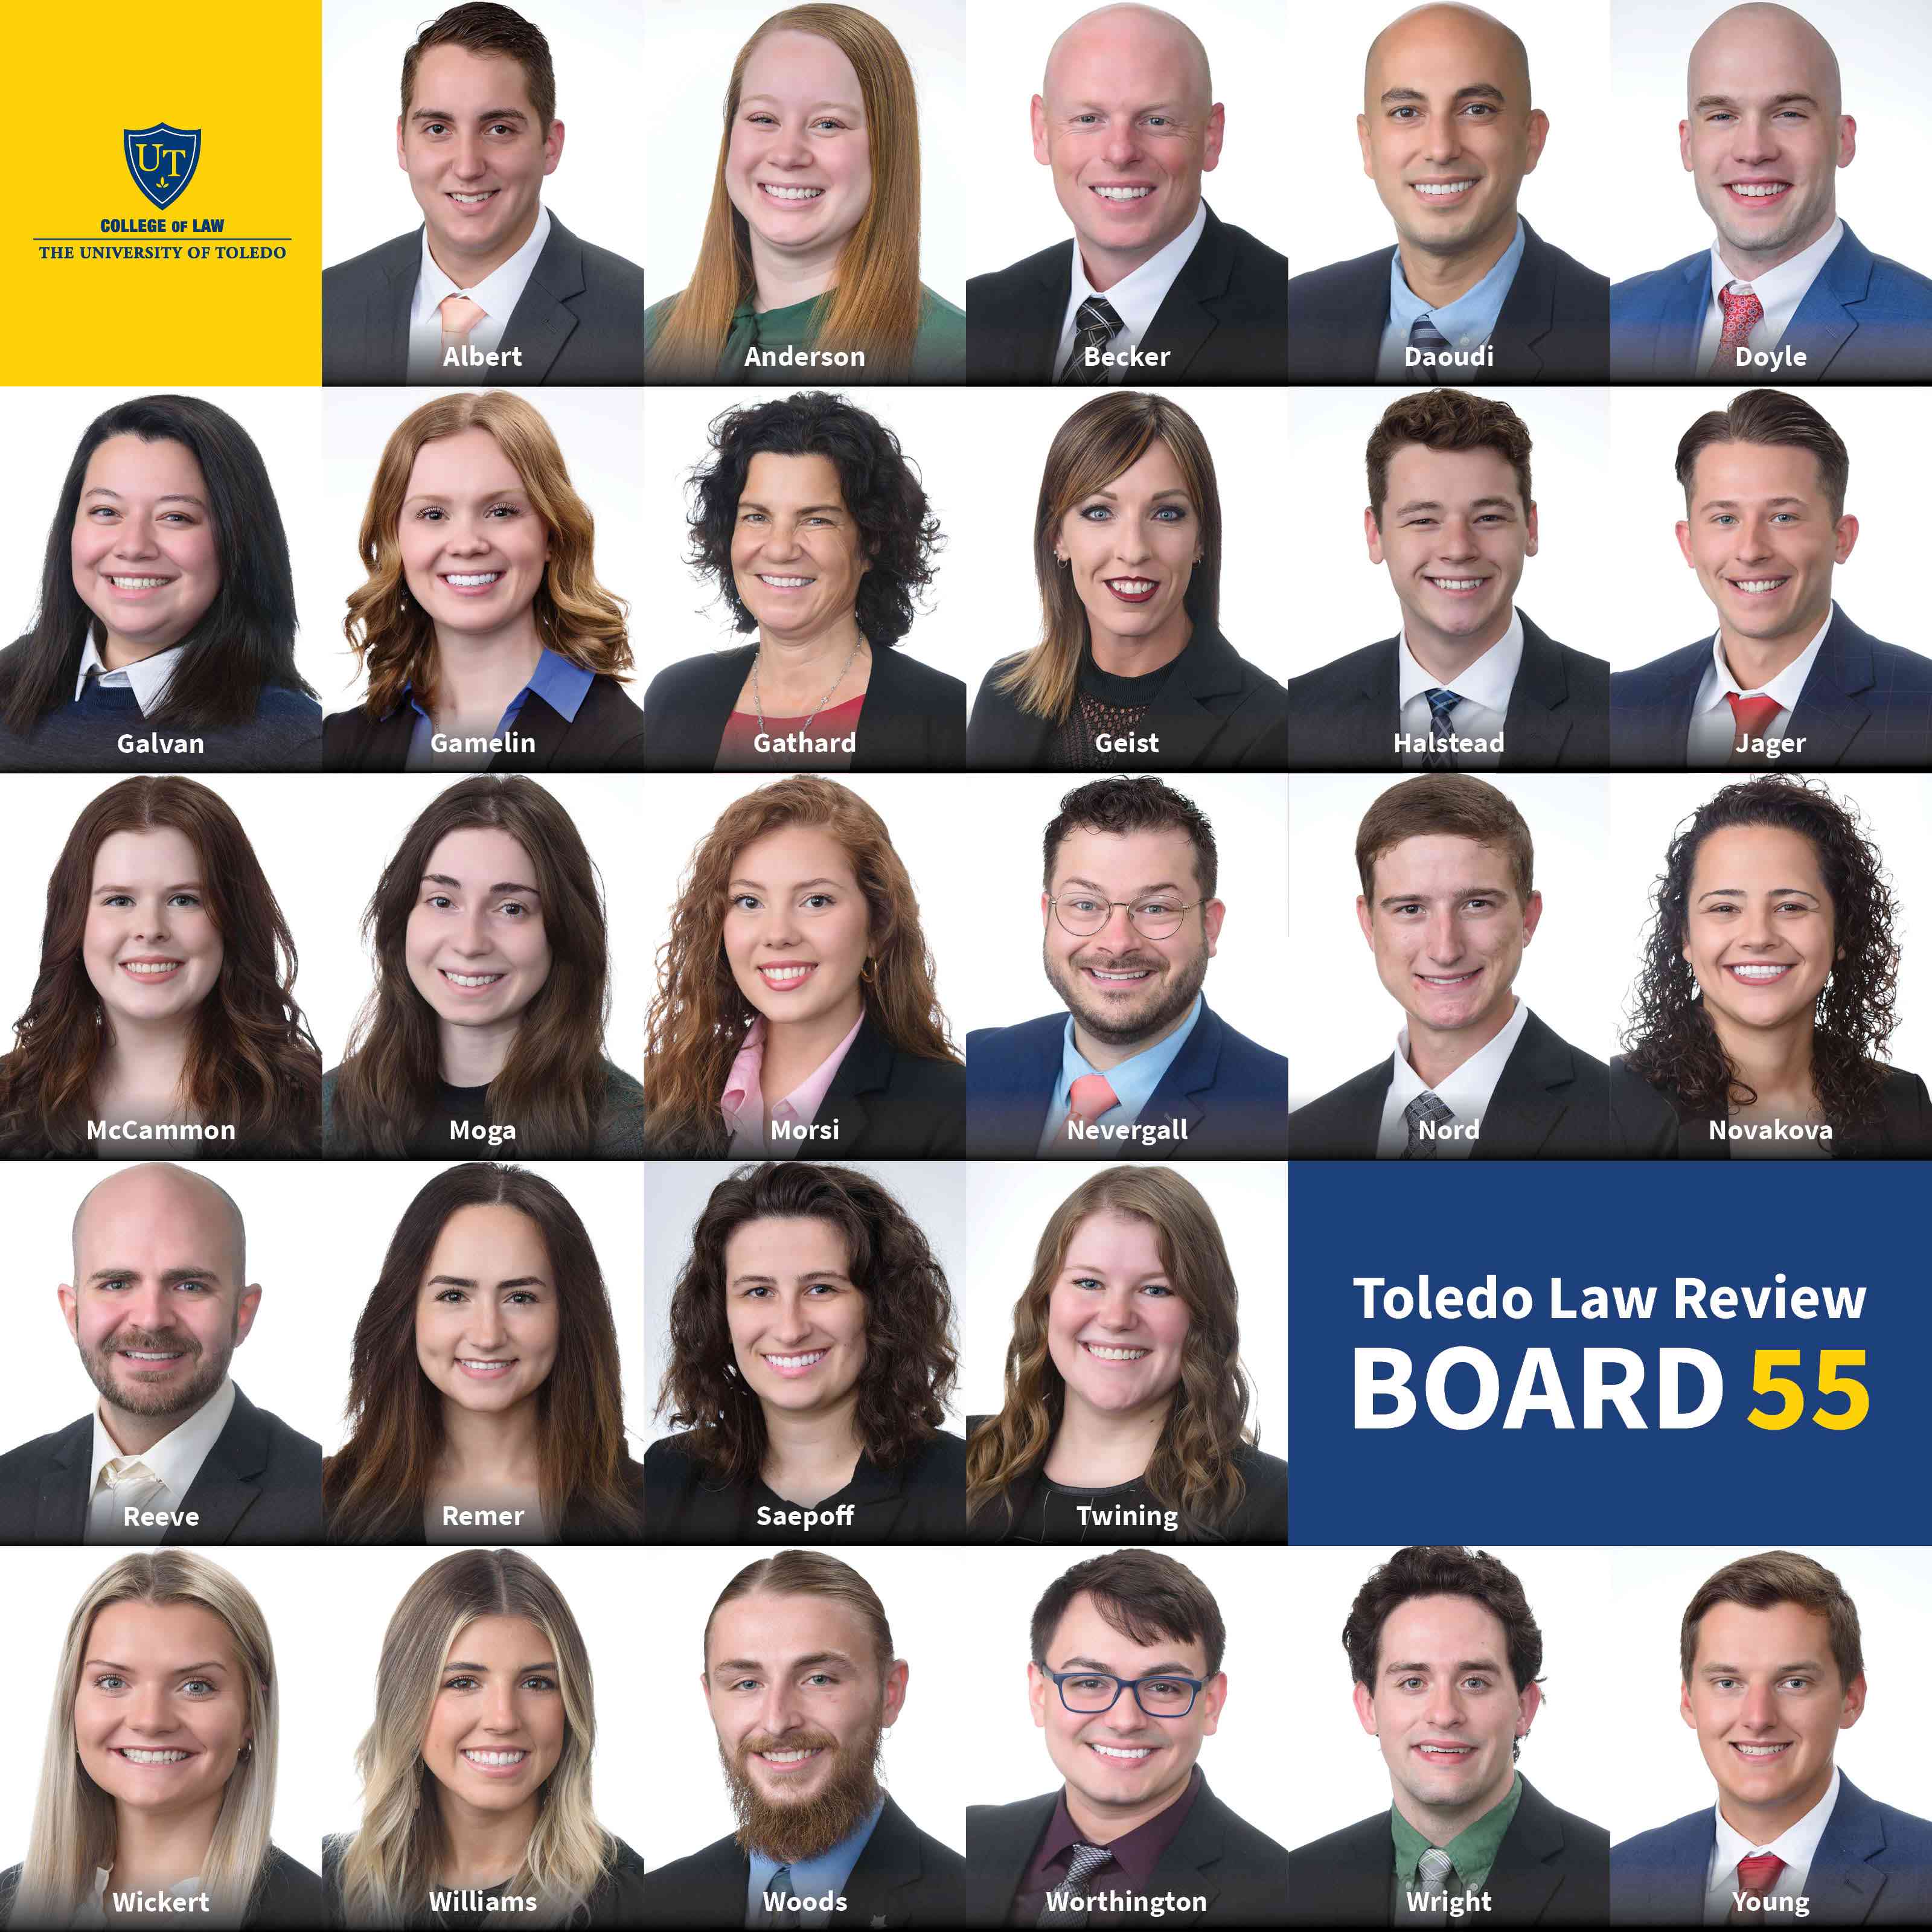 Law Review Board 55